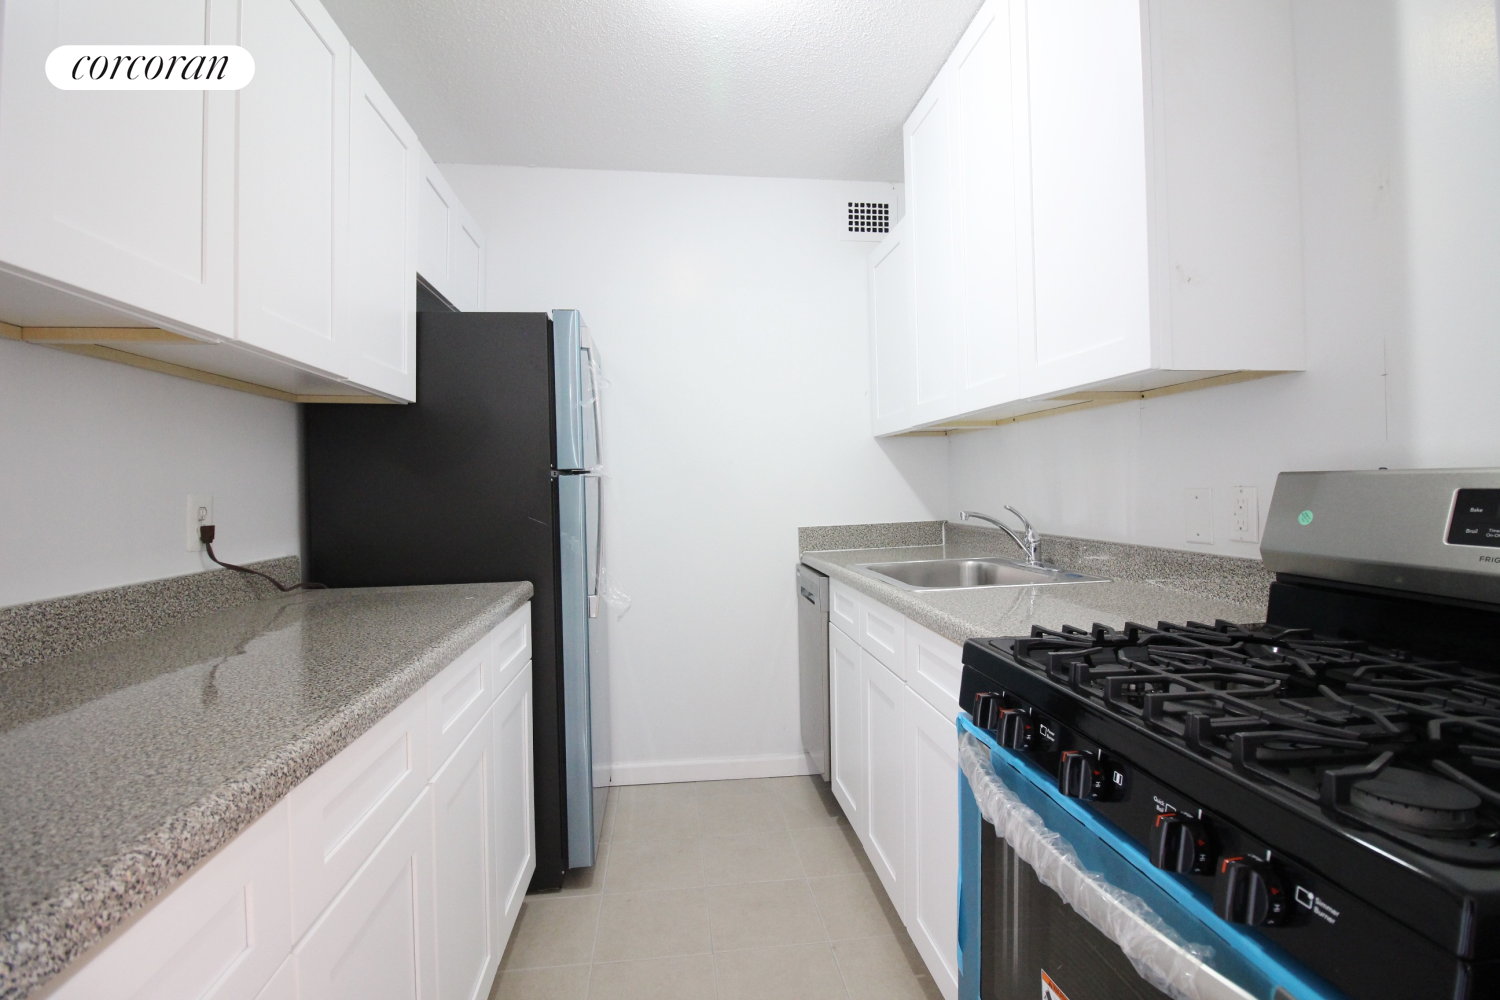 401 2nd Avenue 24E, Gramercy Park And Murray Hill, Downtown, NYC - 1 Bedrooms  
1.5 Bathrooms  
3 Rooms - 